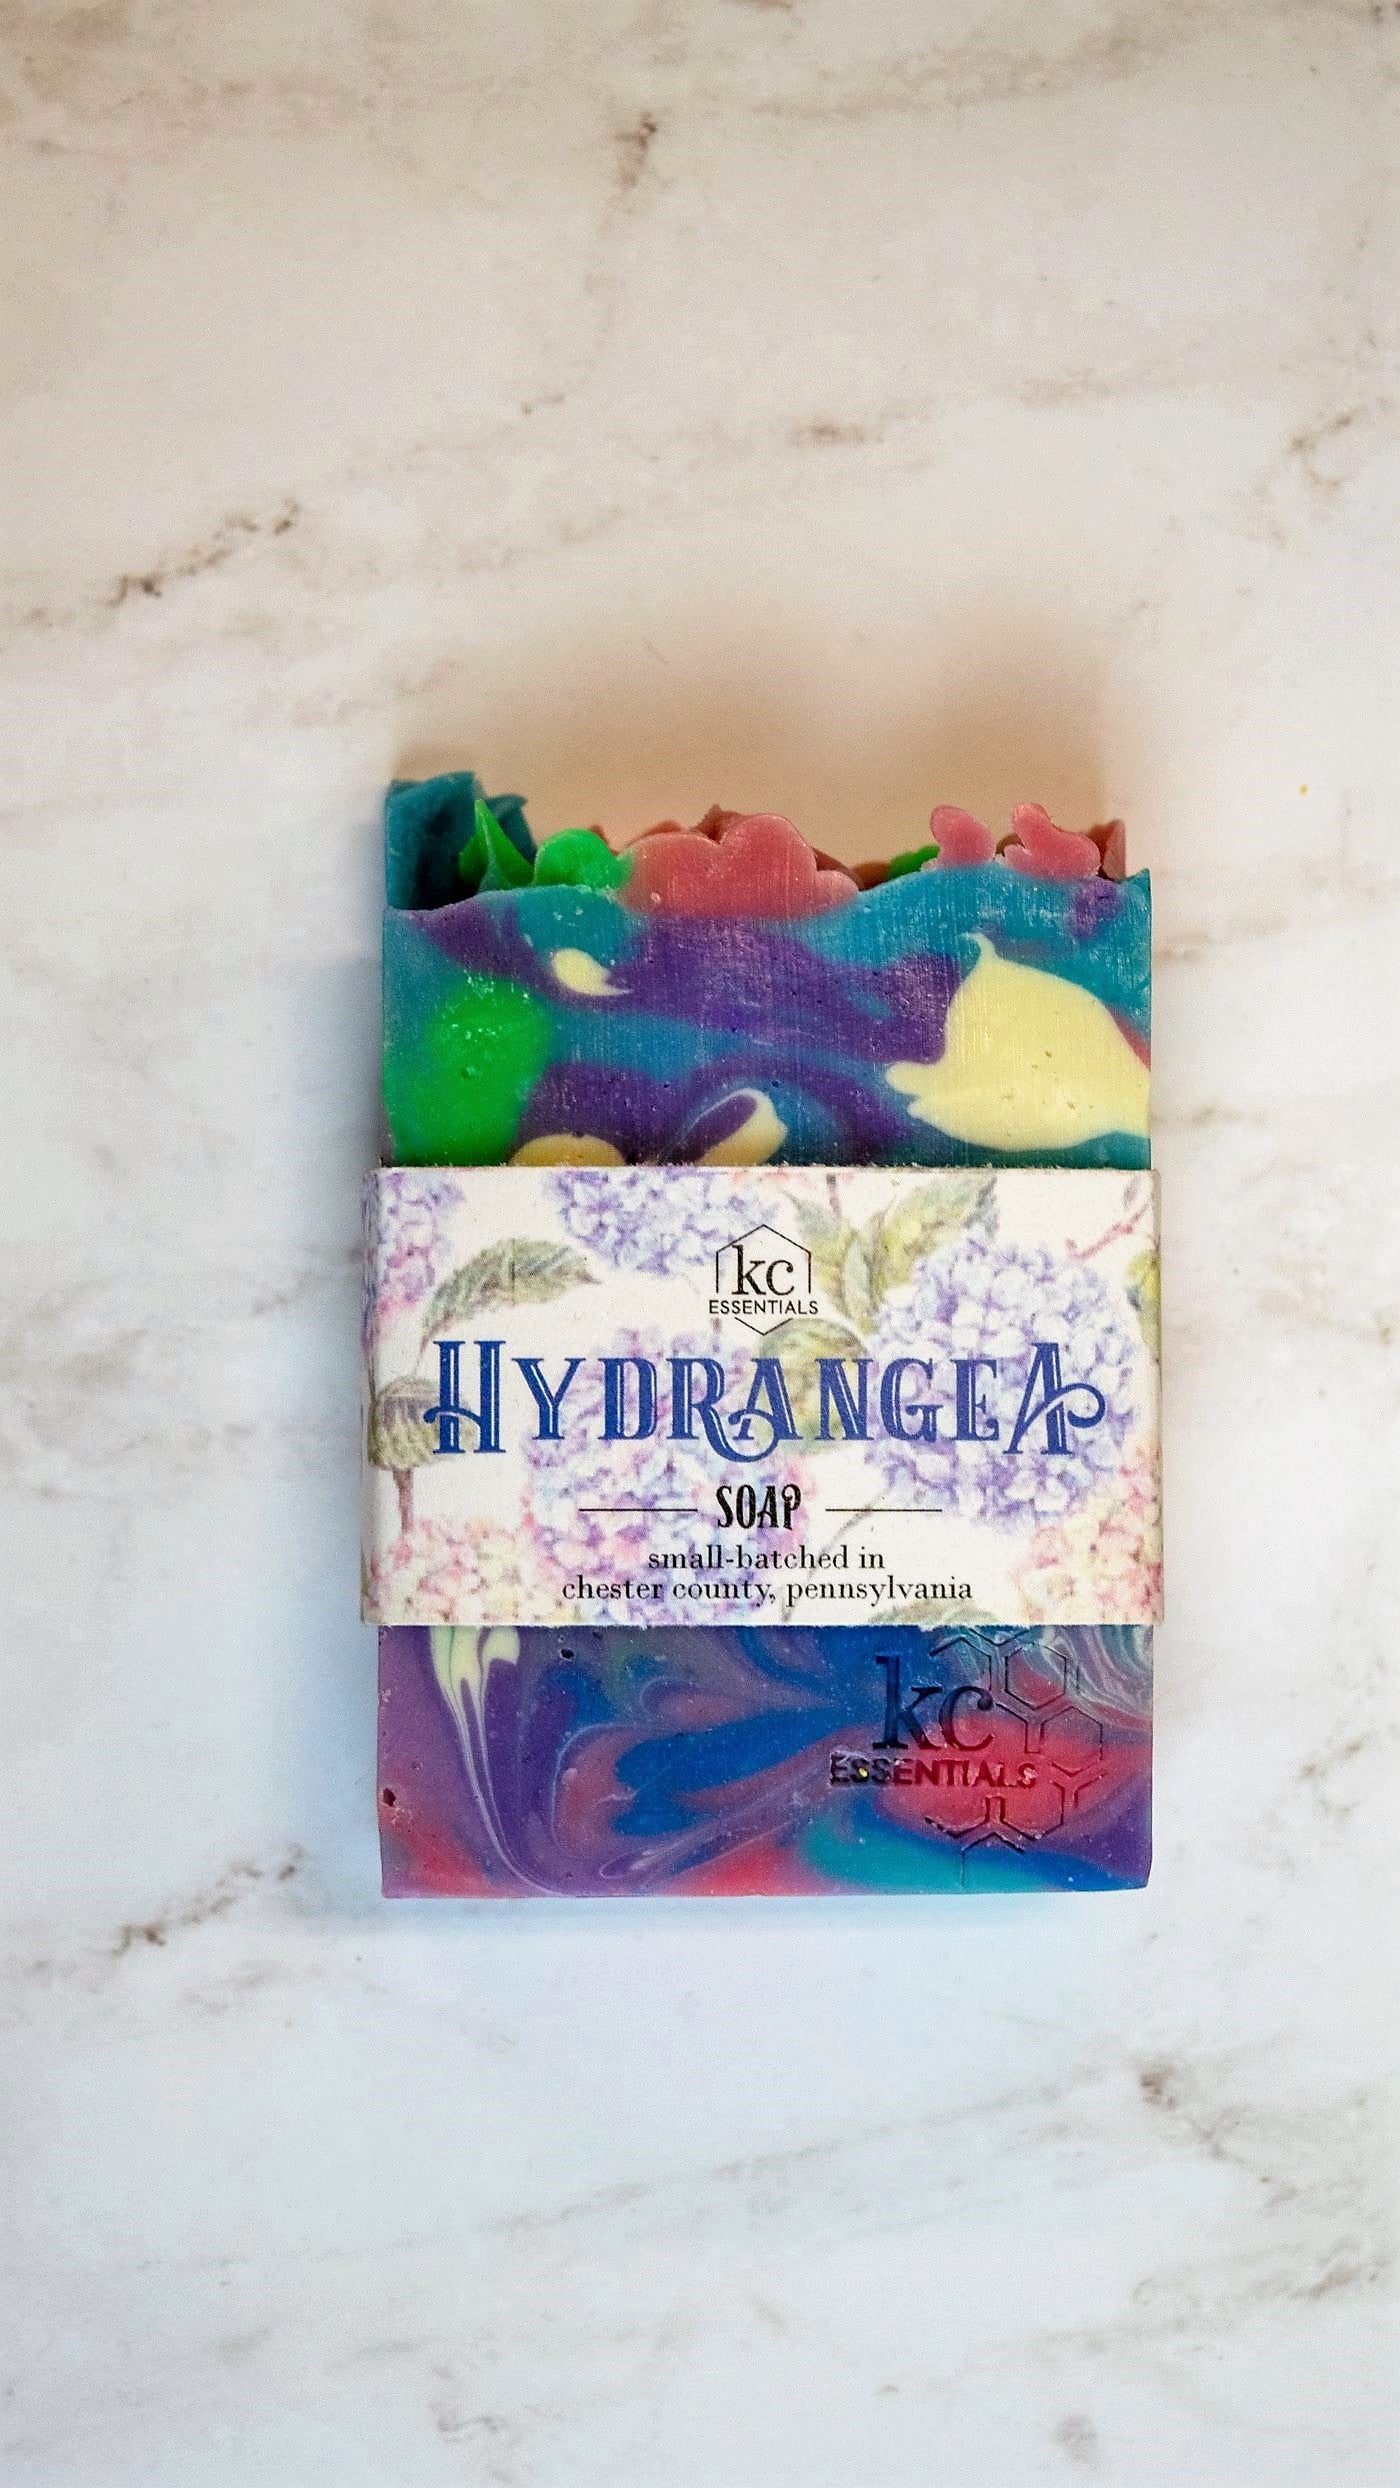 Swirls of purple, pink, white, blue and green in the artisan soap bar.